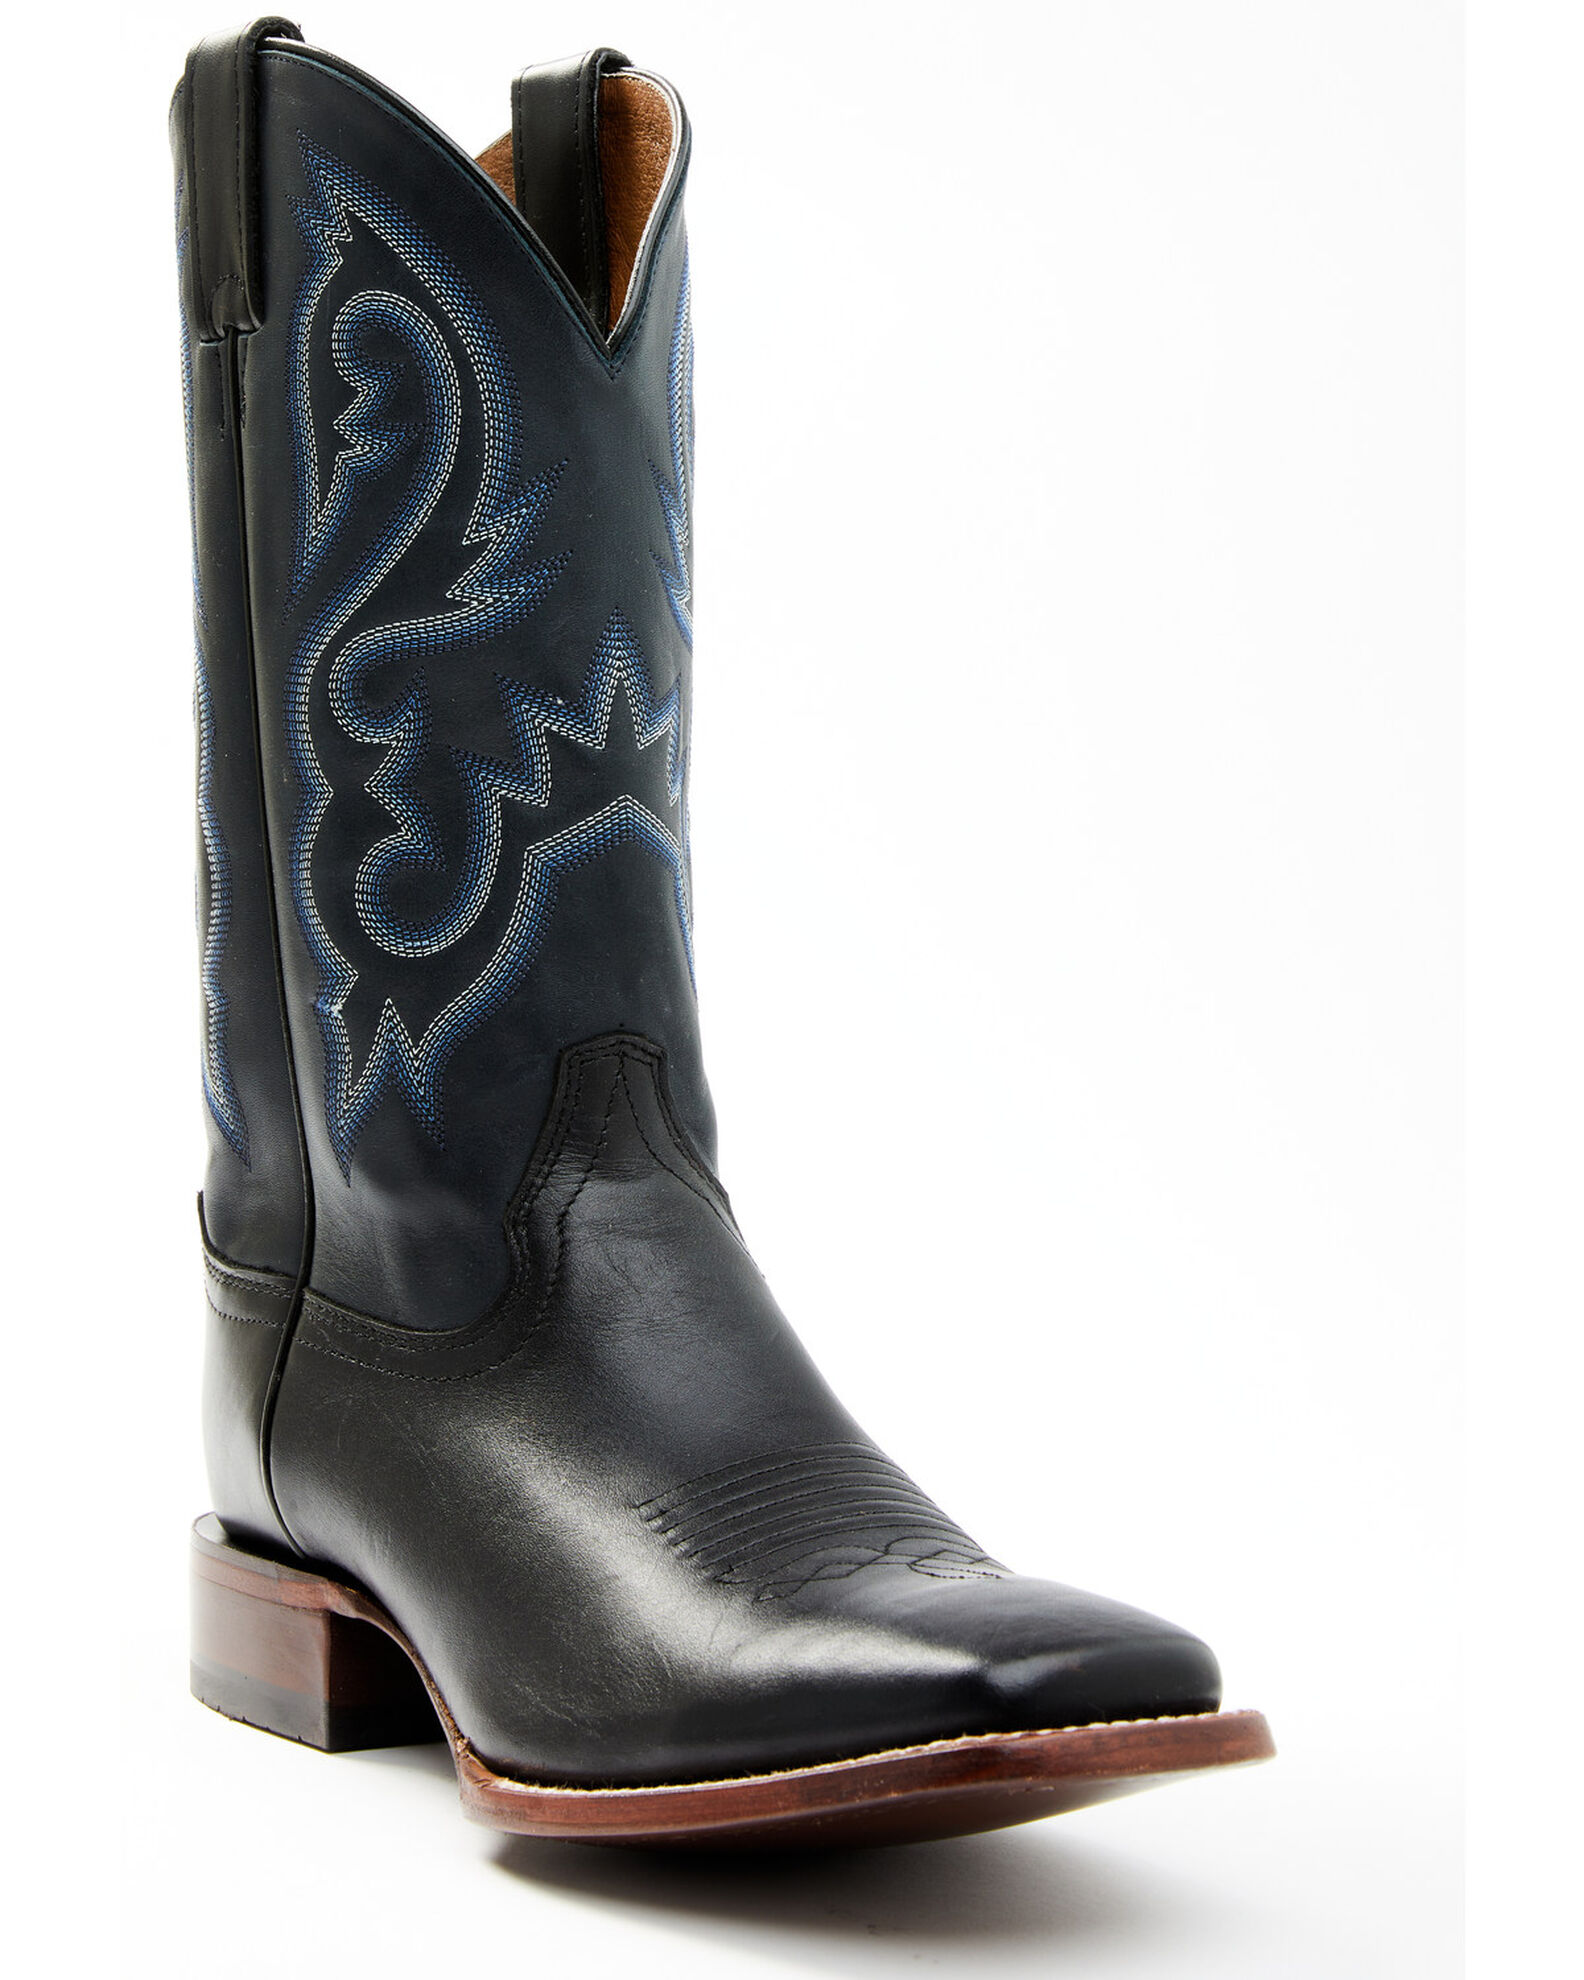 Cody James Men's Embroidered Western Boots - Broad Square Toe